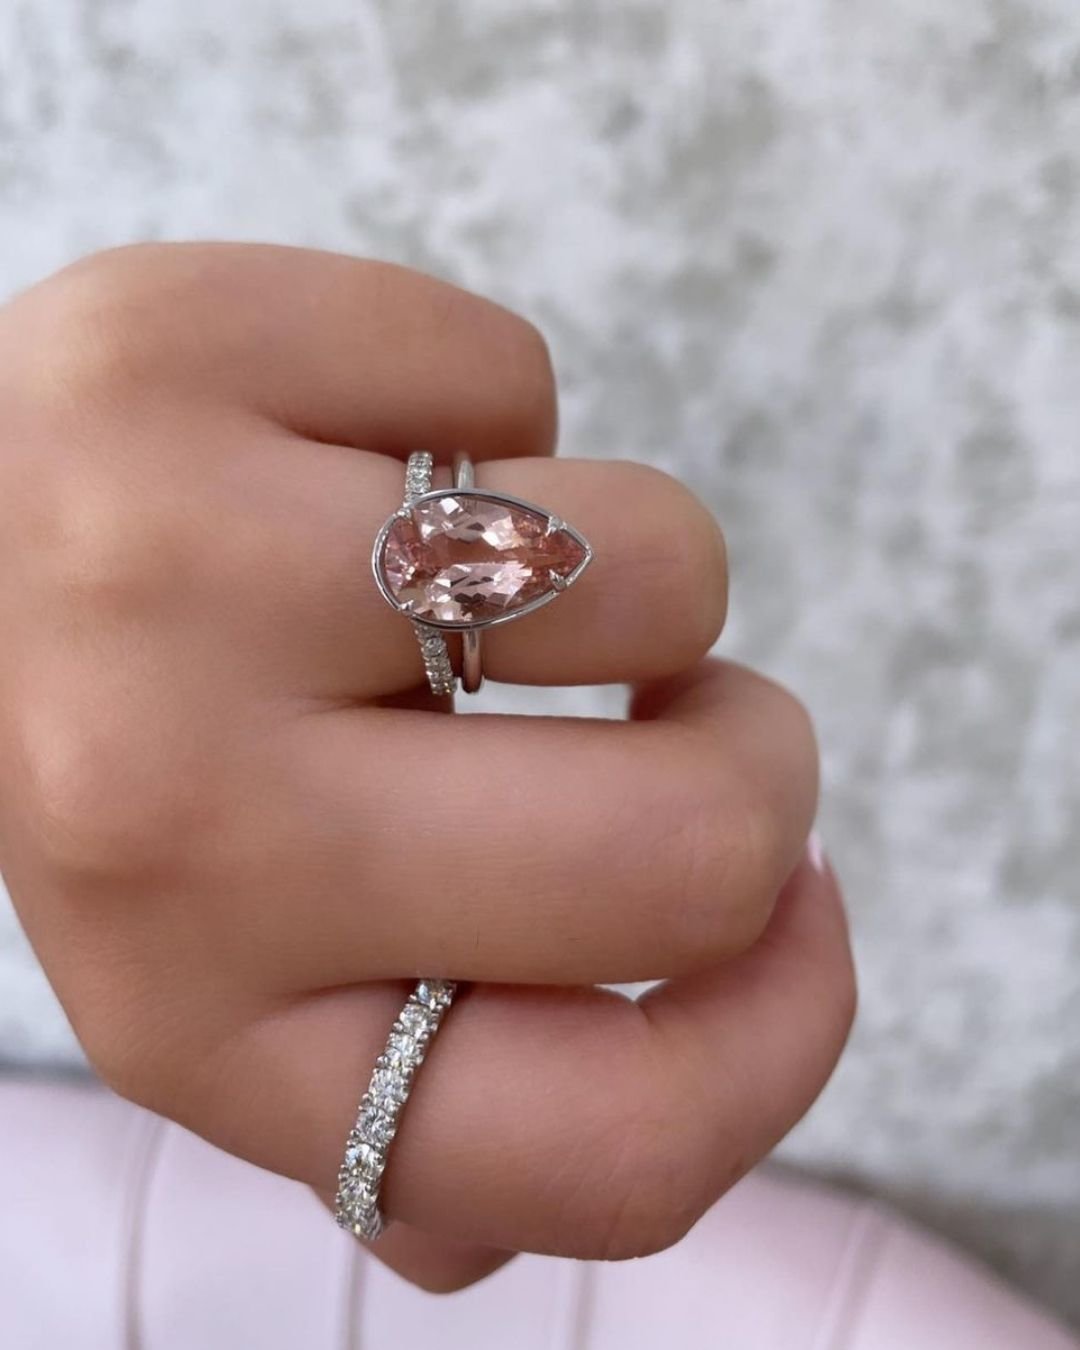 morganite engagement rings with amazing details2